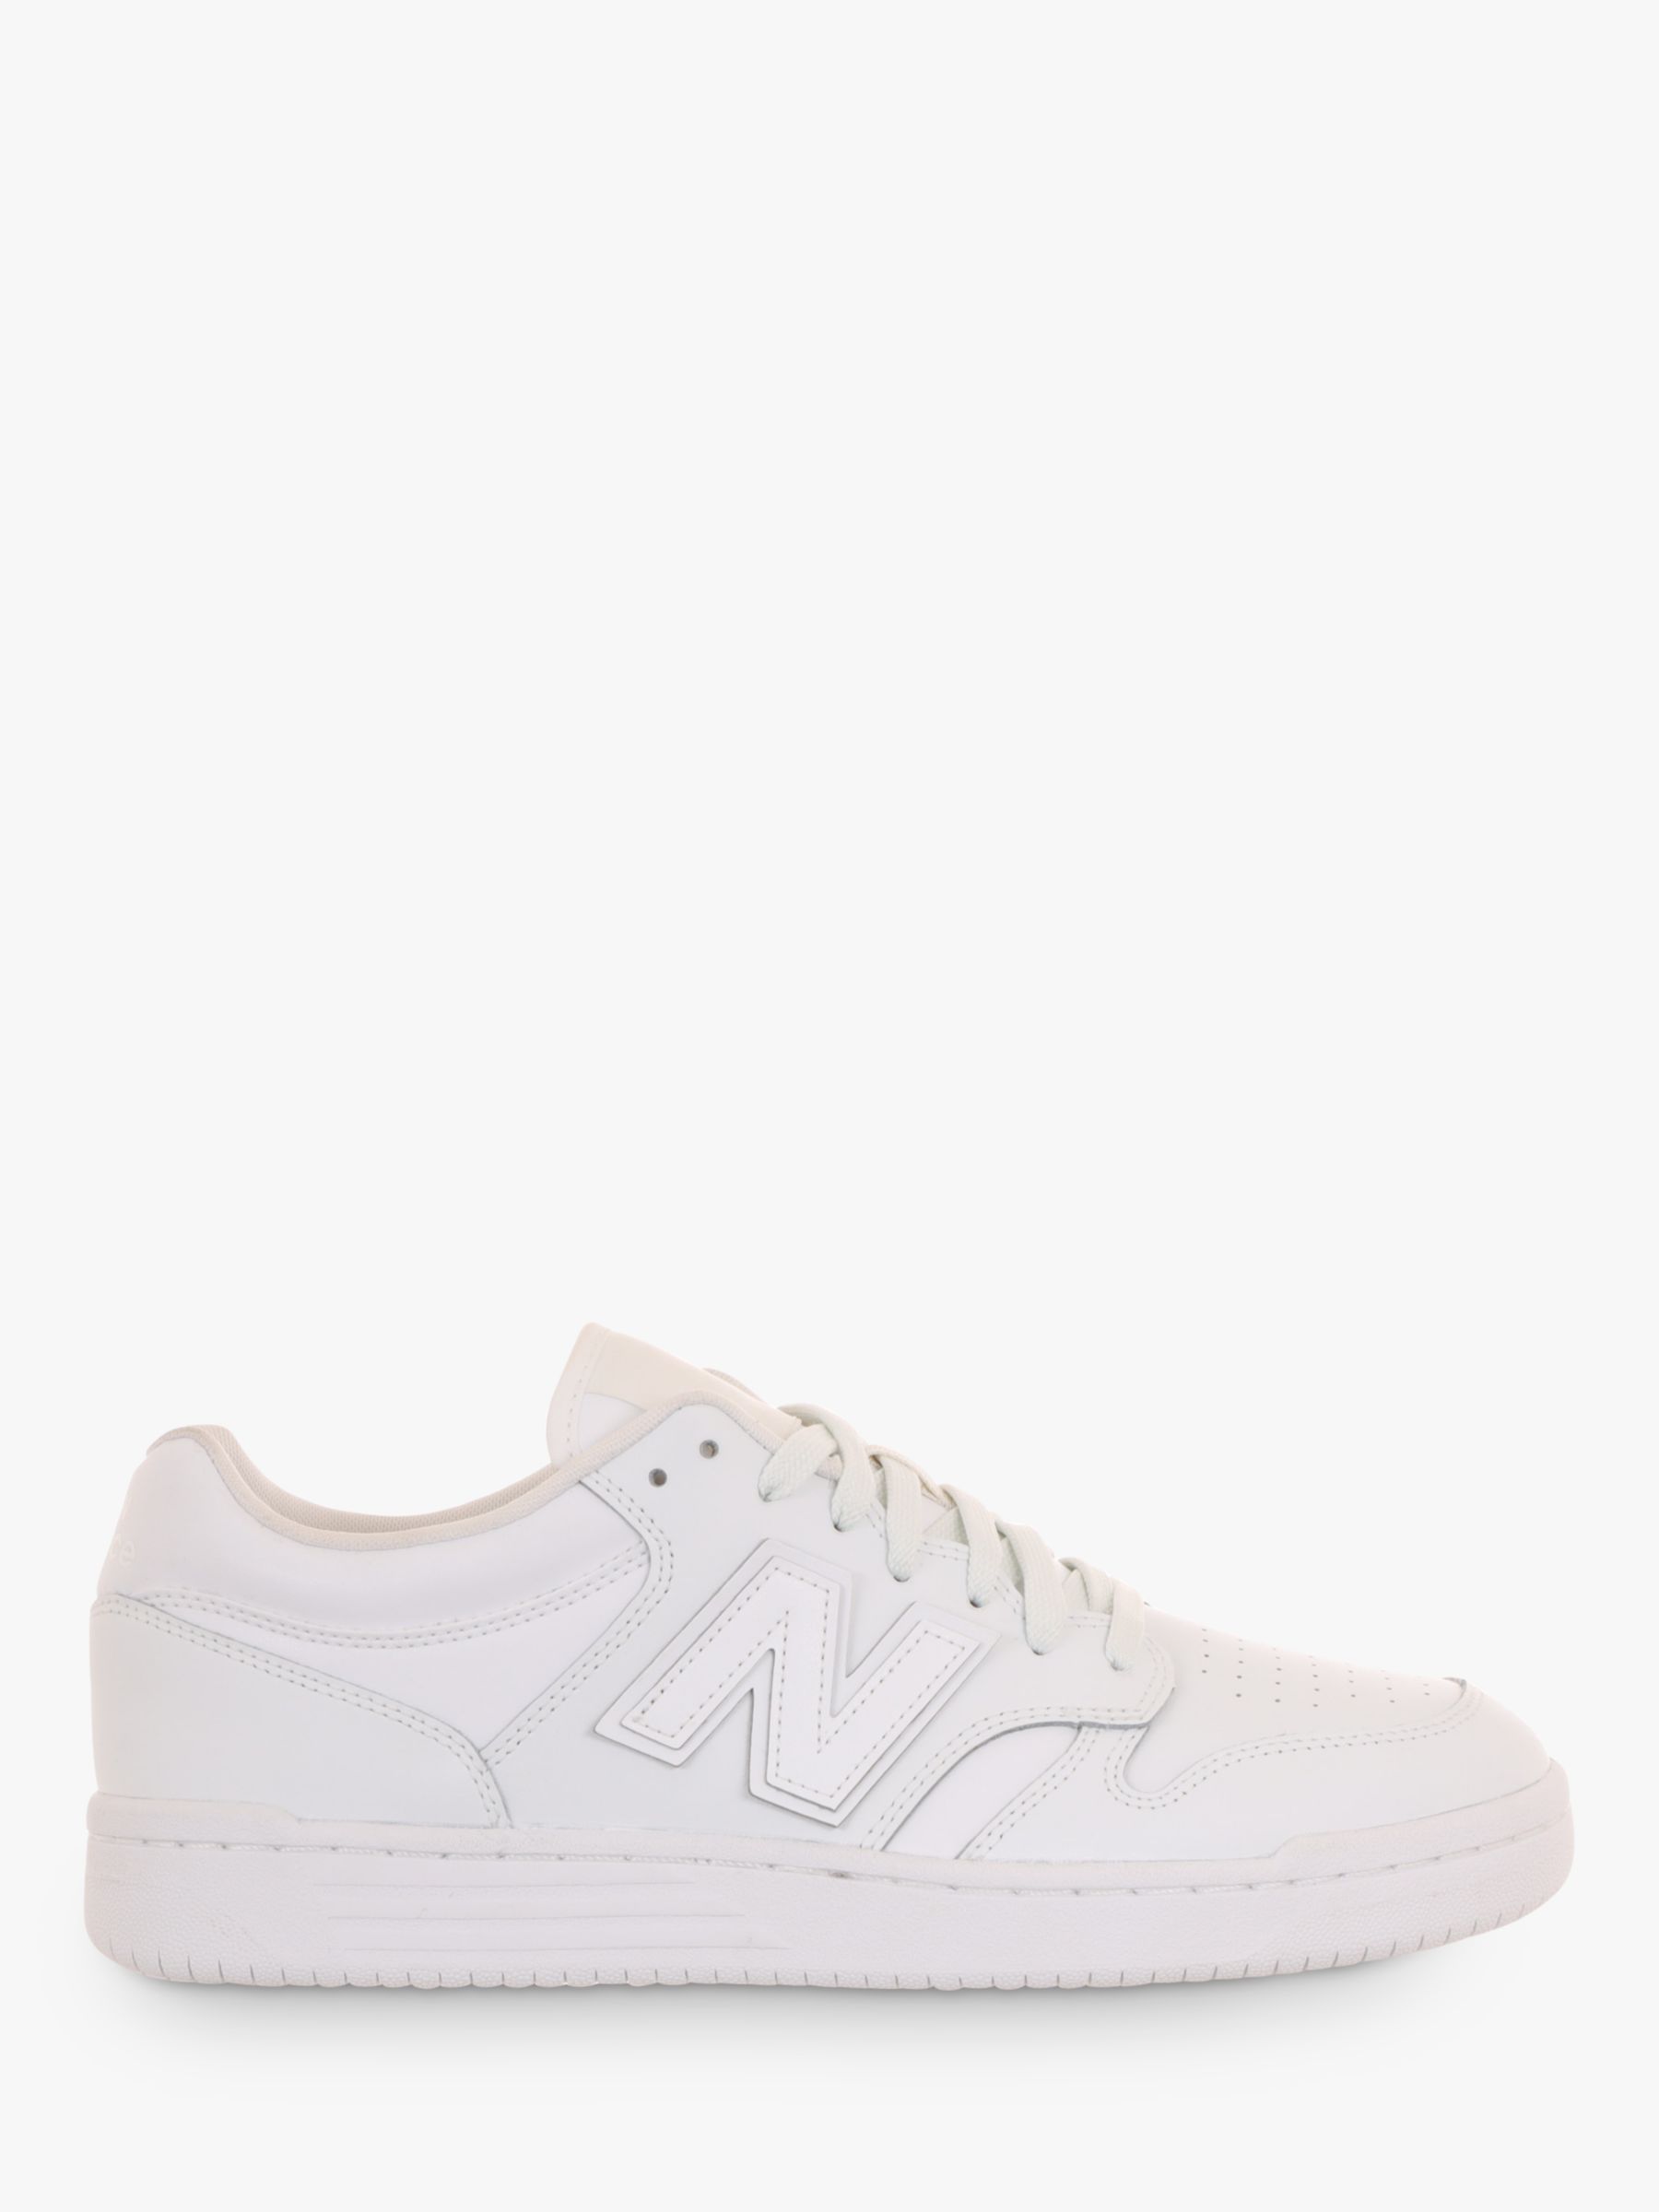 New Balance BB480 Leather Lace Up Trainers, White at John Lewis & Partners